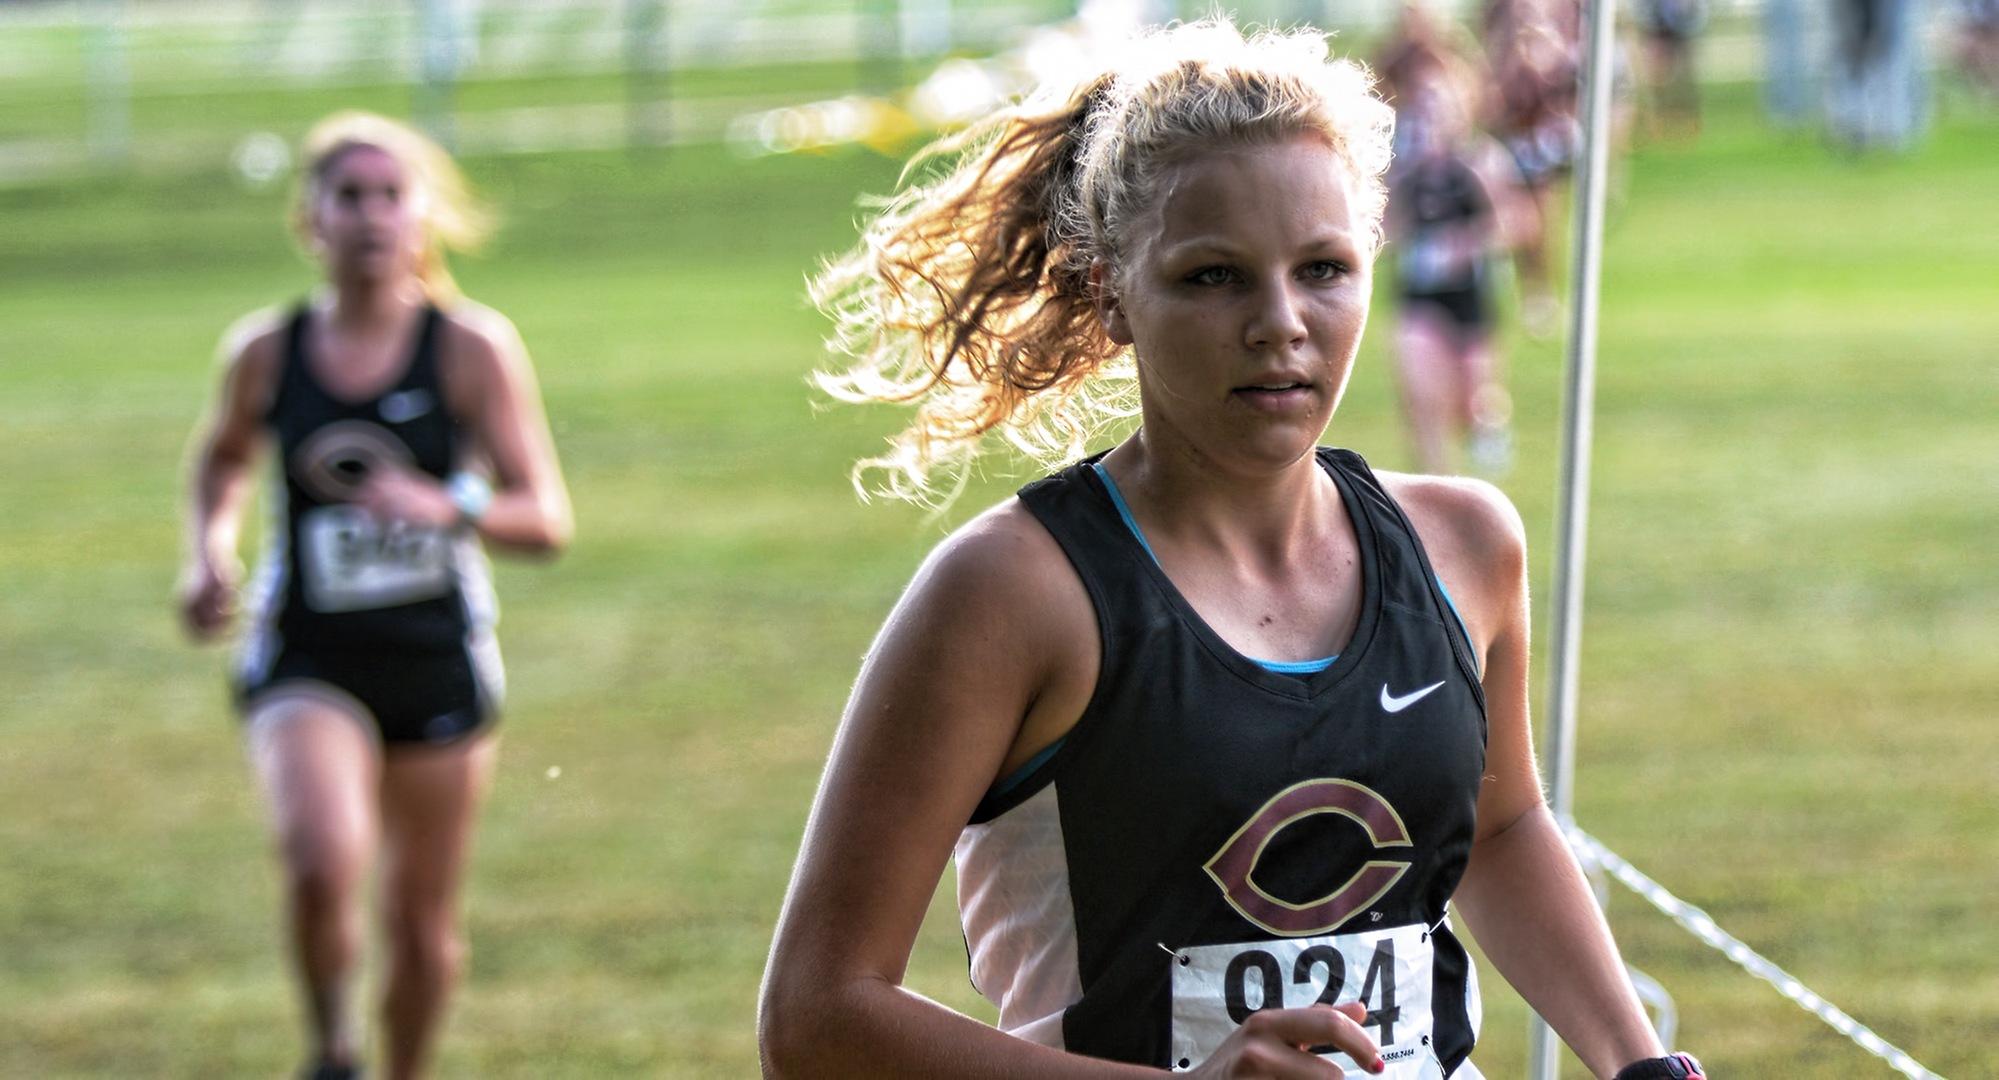 Junior Kara Andersen led Concordia for the second straight meet in the 2018 season as she placed 14th at the MSU Moorhead Twilight Meet.